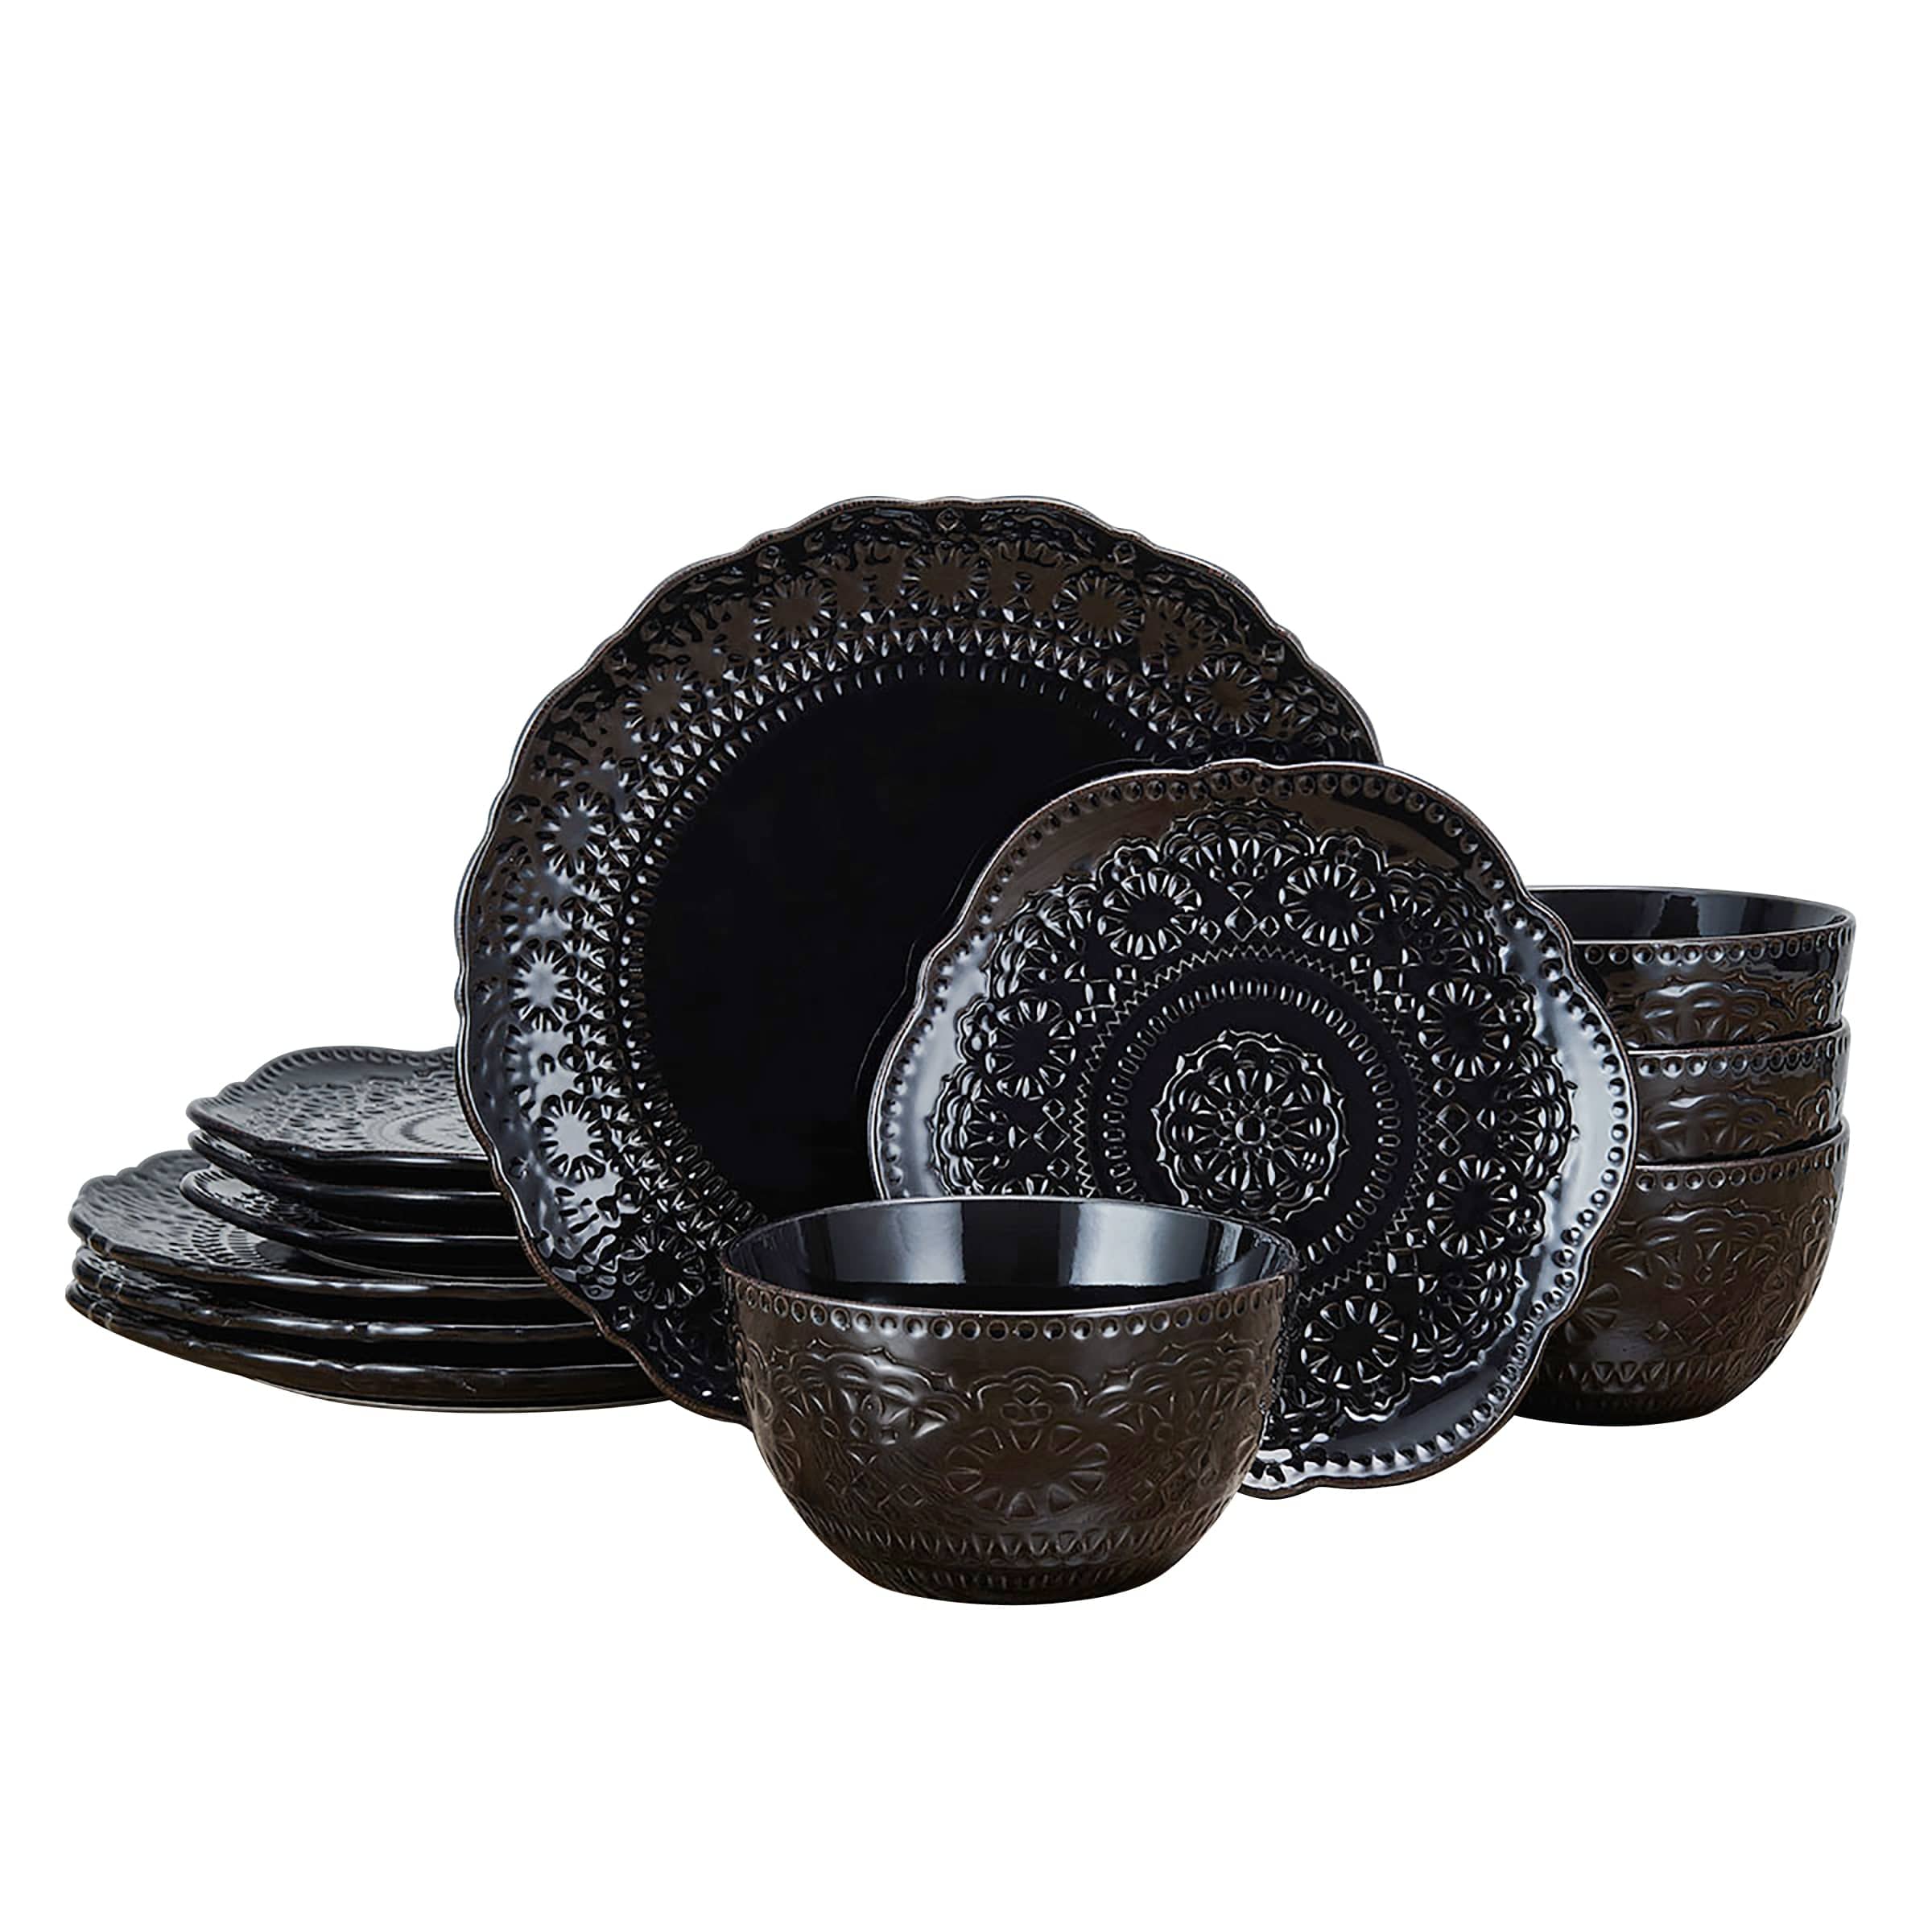 Chateau Midnight 12 Piece Dinnerware Set, Service for 4